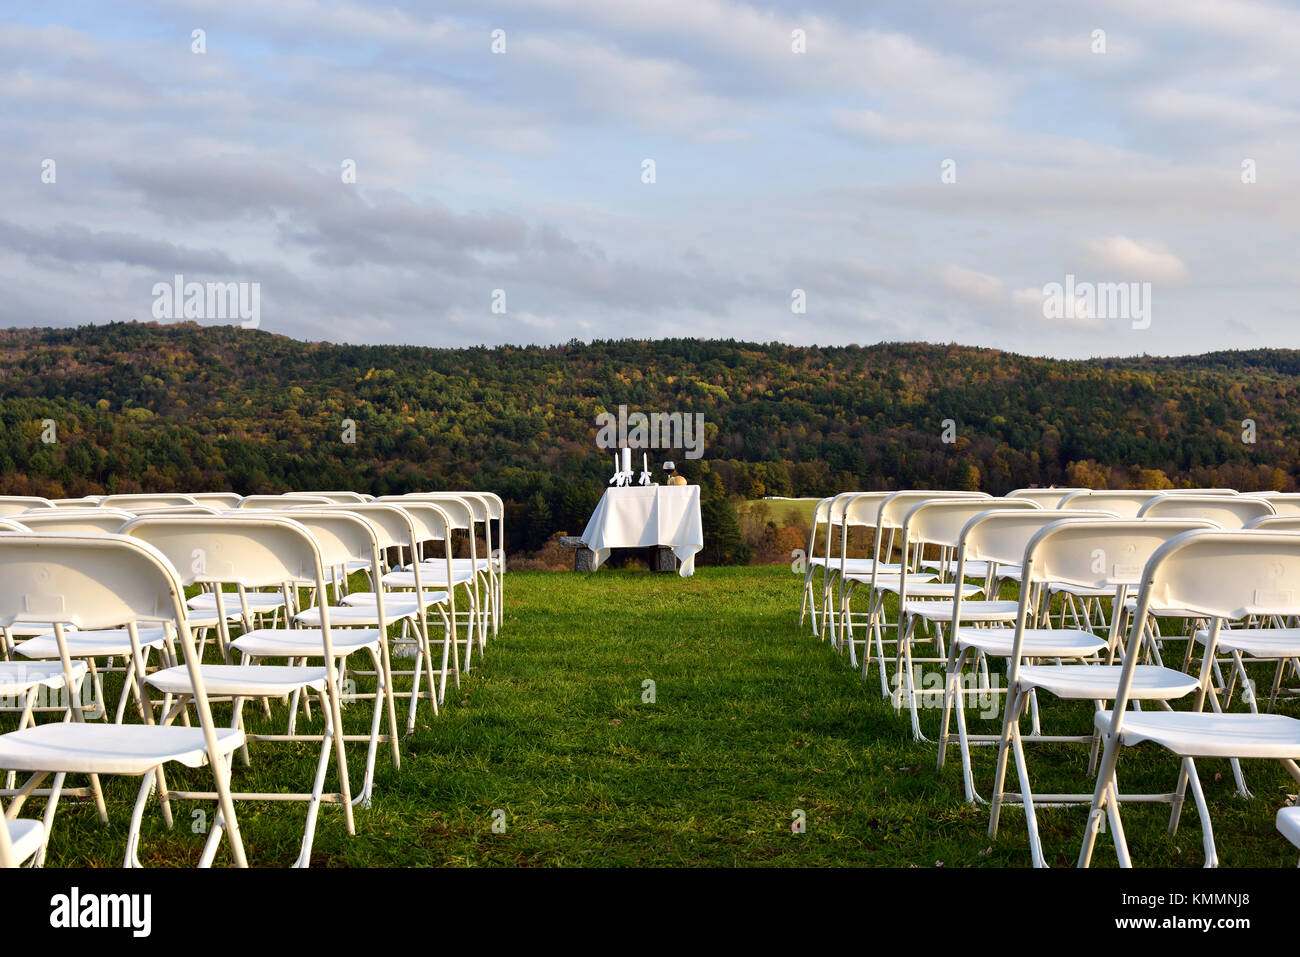 Outdoor wedding reception, service arrangements, chairs, table, bread and wine for a simple ceremony with a beautiful view Stock Photo